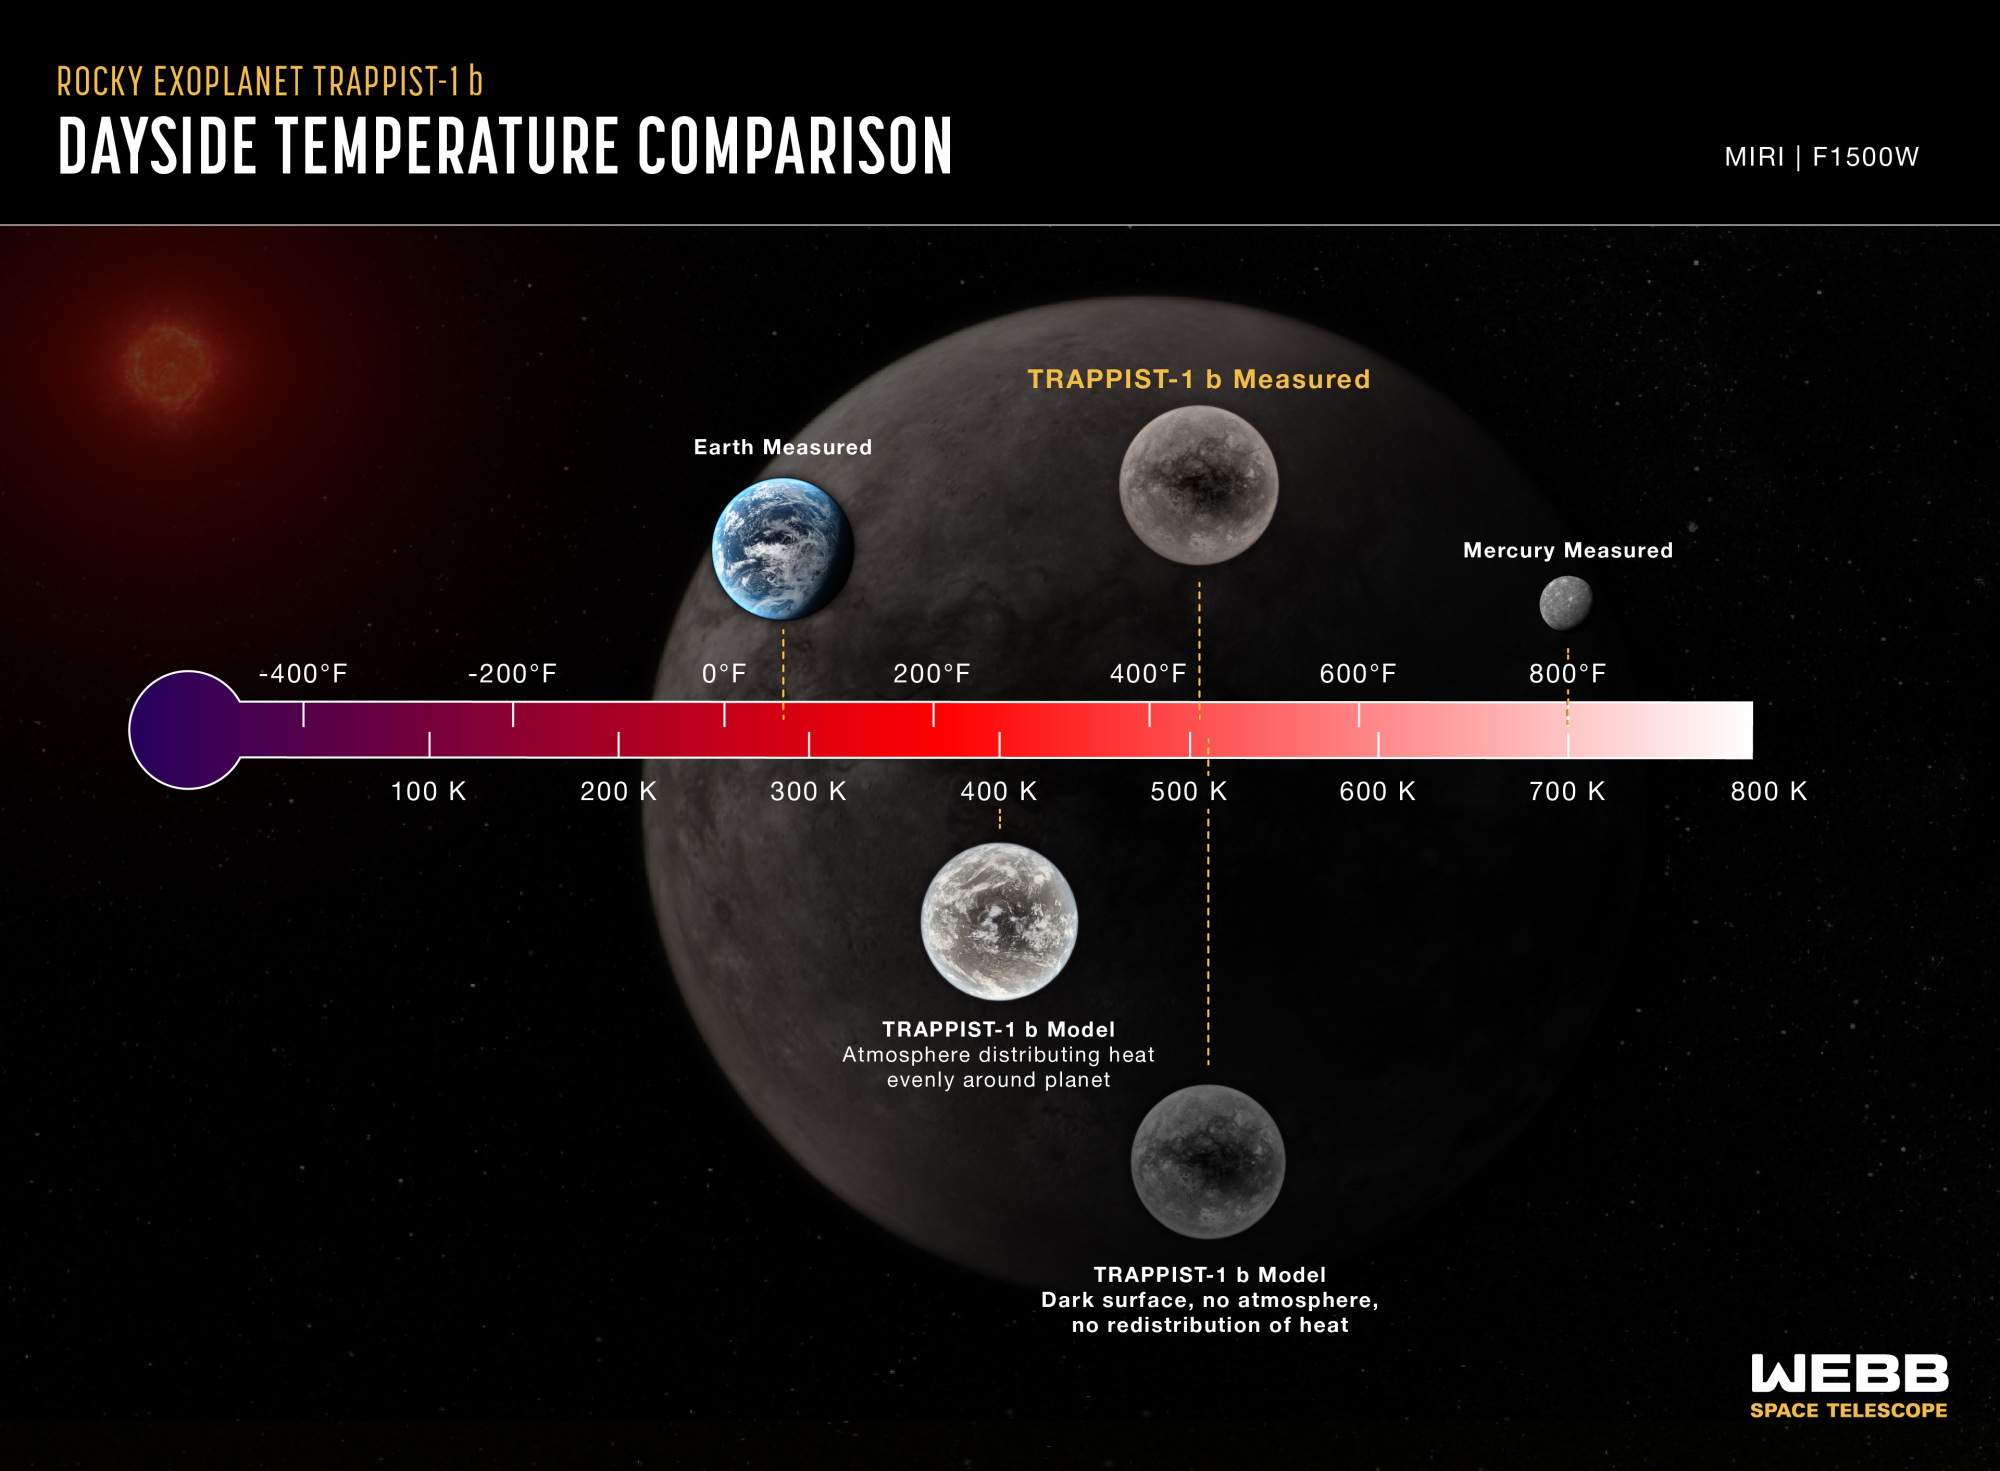 Comparison of day side temperatures on several planets including TRAPPIST-1 b and Earth.